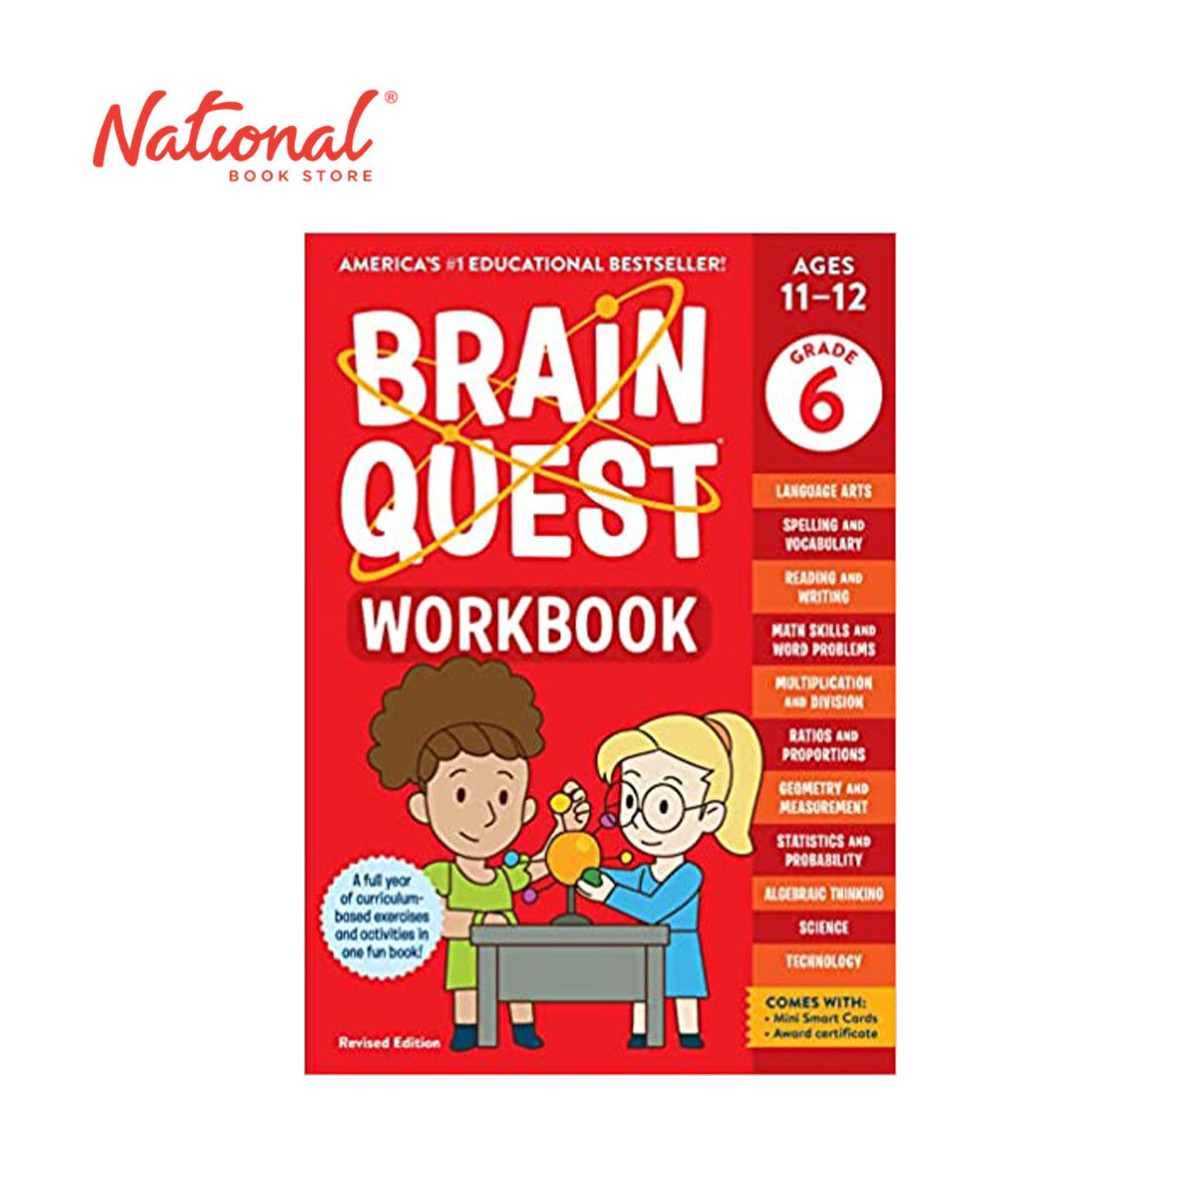 Brain Quest Workbook: 6th Grade Revised Edition - Trade Paperback - Activity Books for Kids